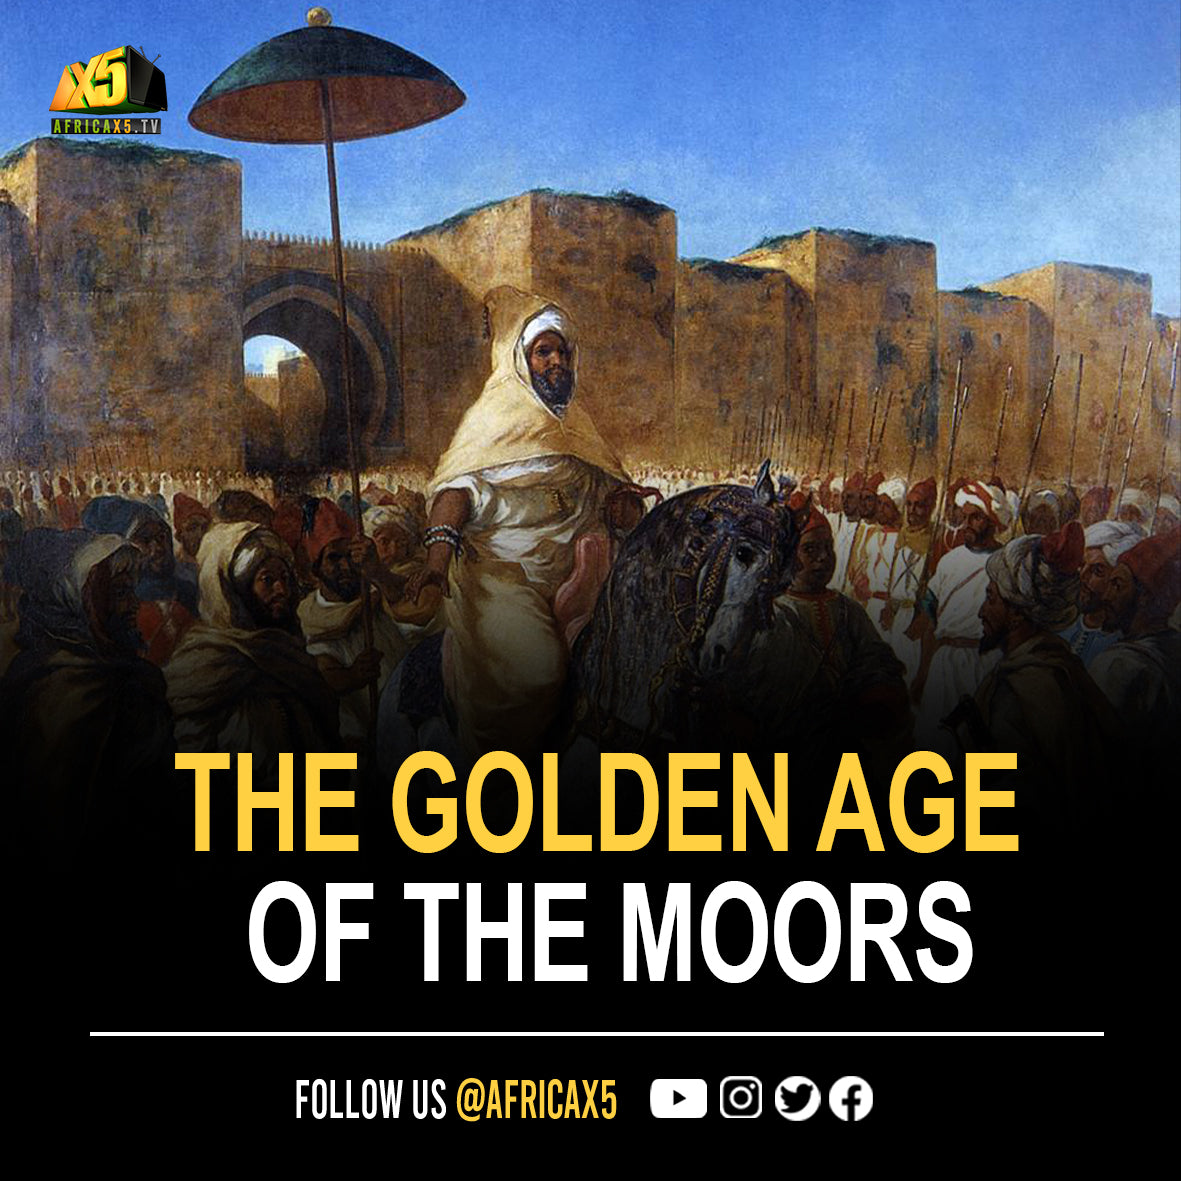 THE GOLDEN AGE OF THE MOORS.